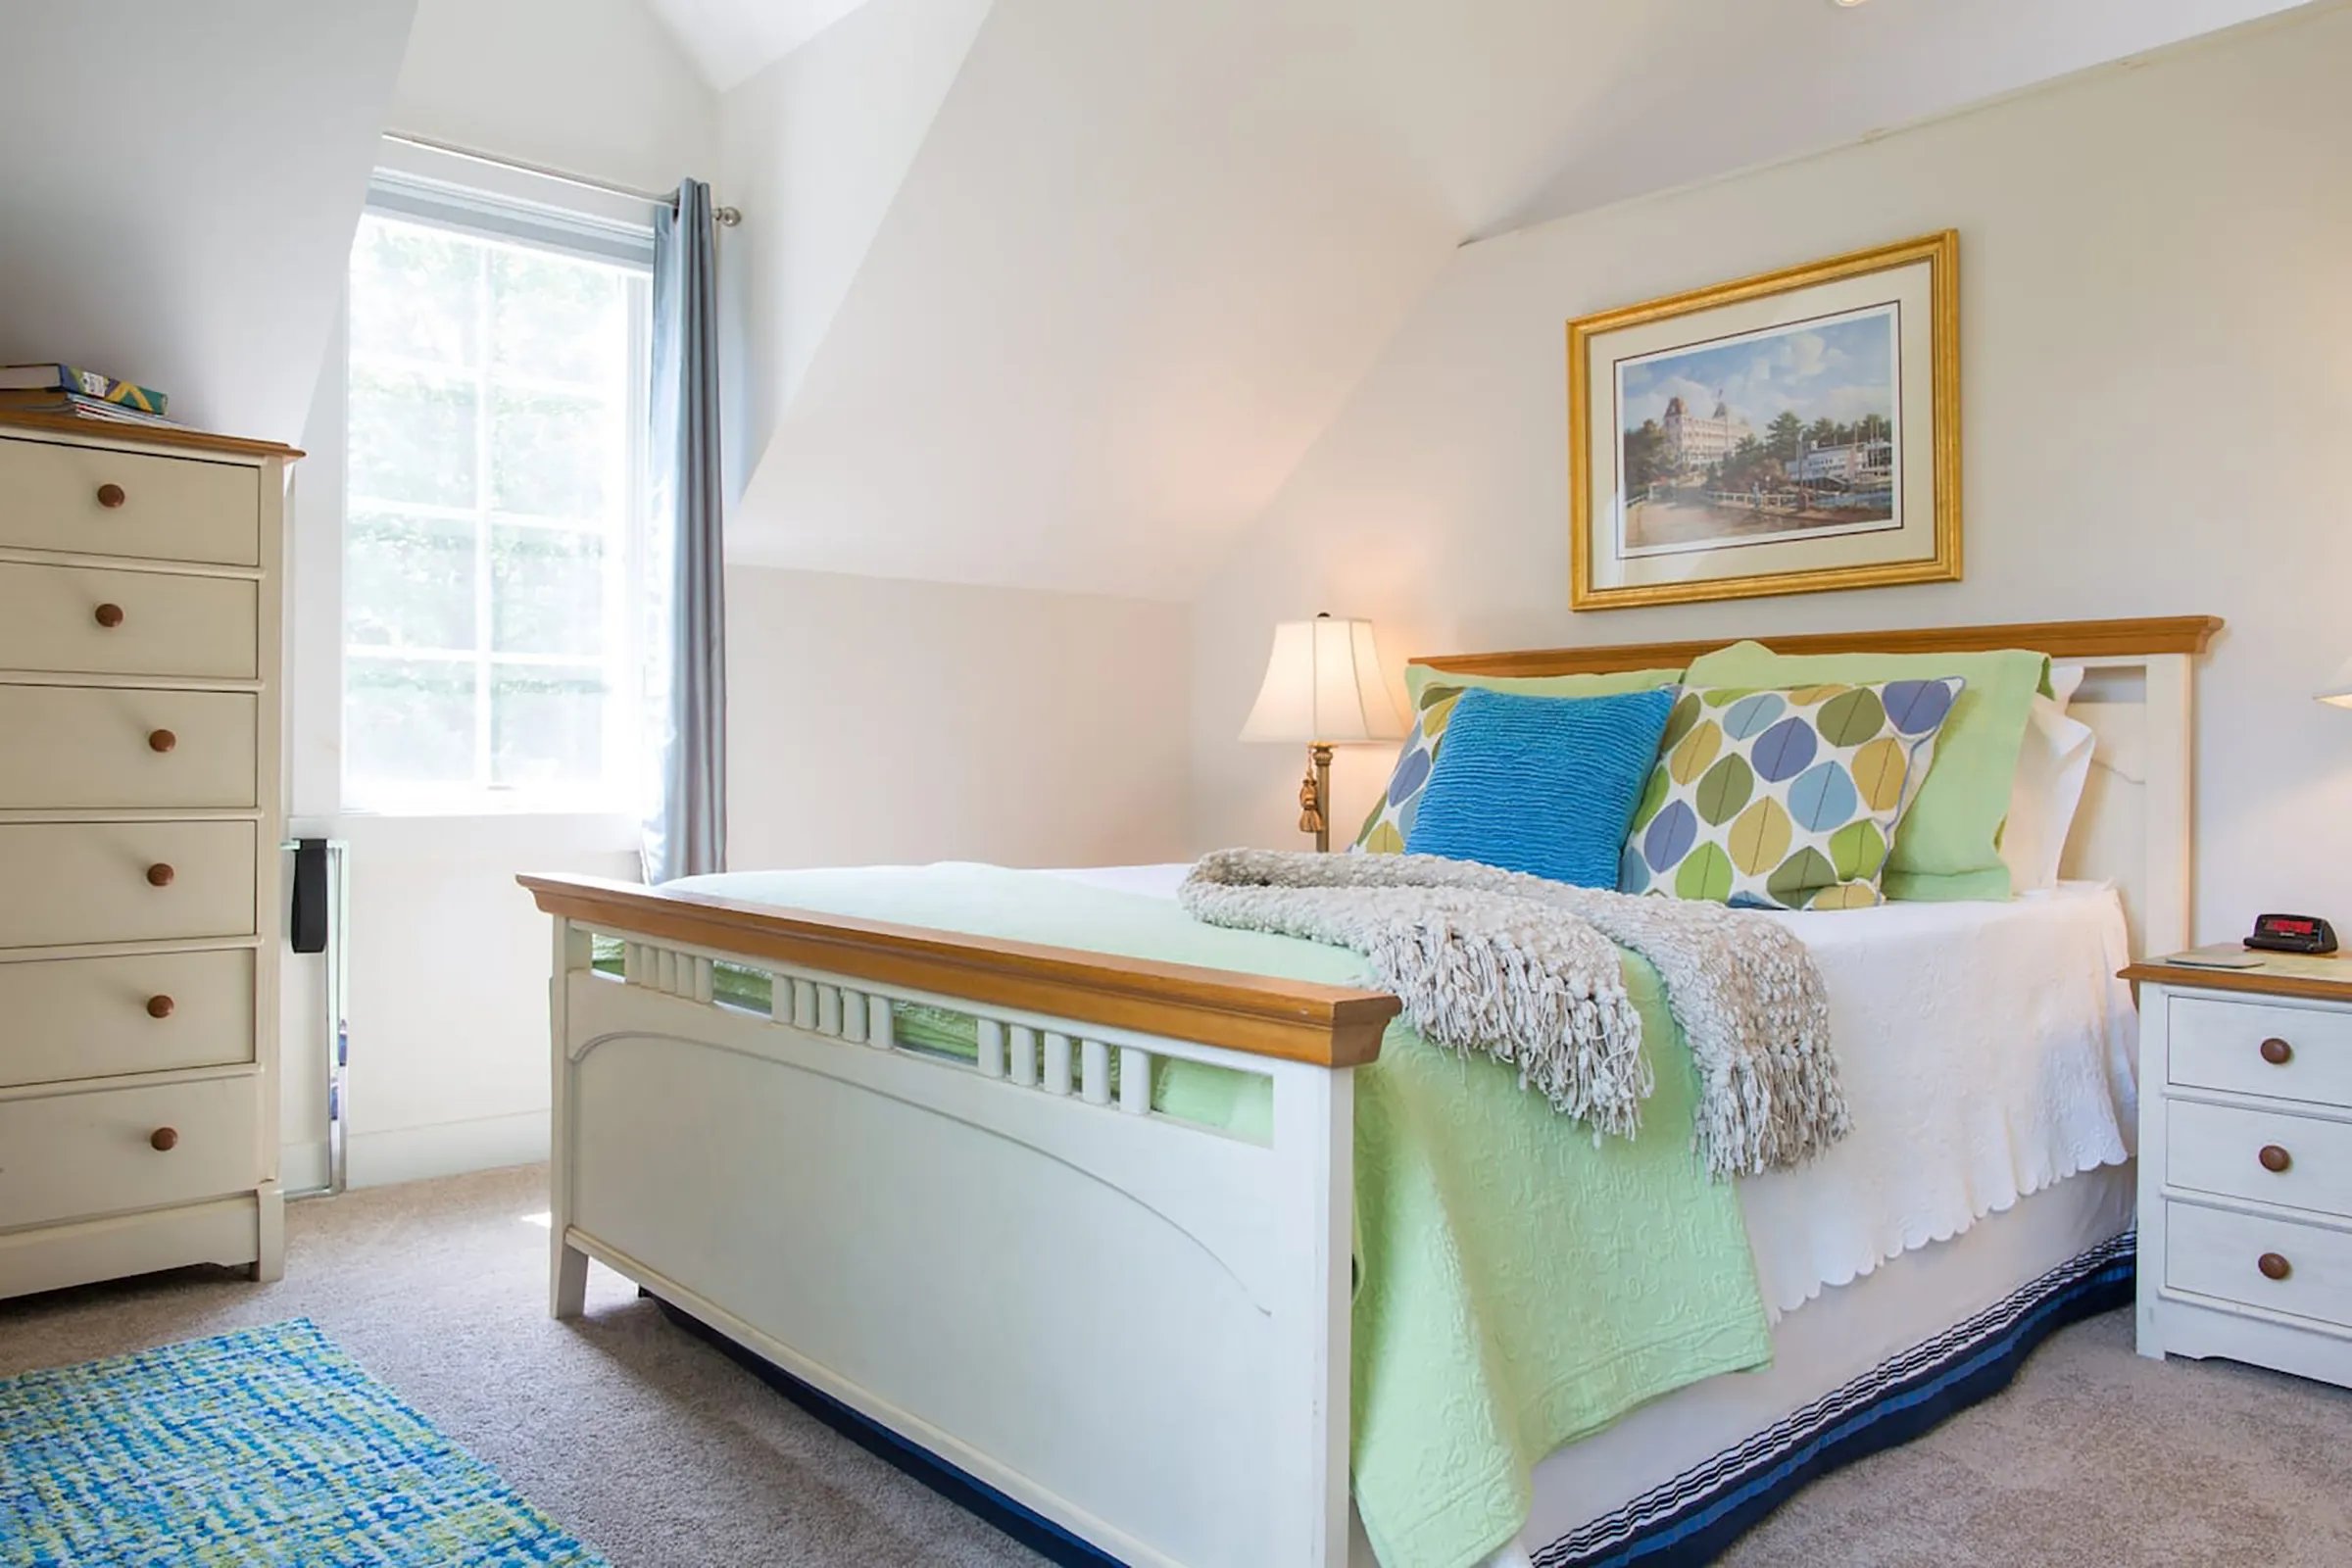 A bed with bright green and blue pillows and comforter. Above the bed hangs a picture of a building with a golden frame. 